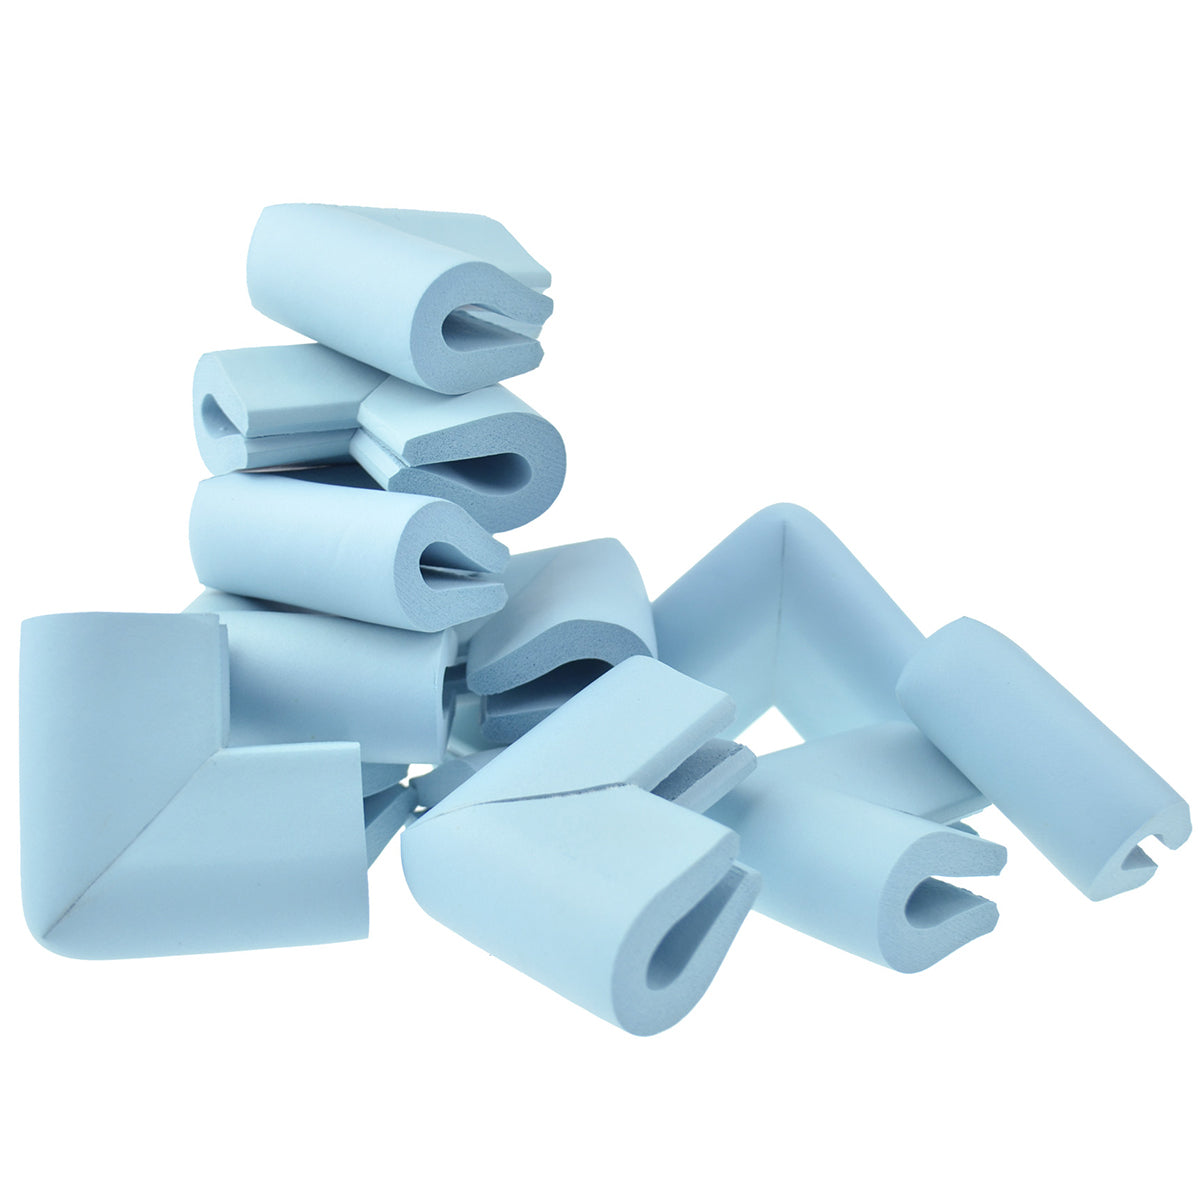 12 pieces skyblue u-shaped foam corner protectors show with a white background.